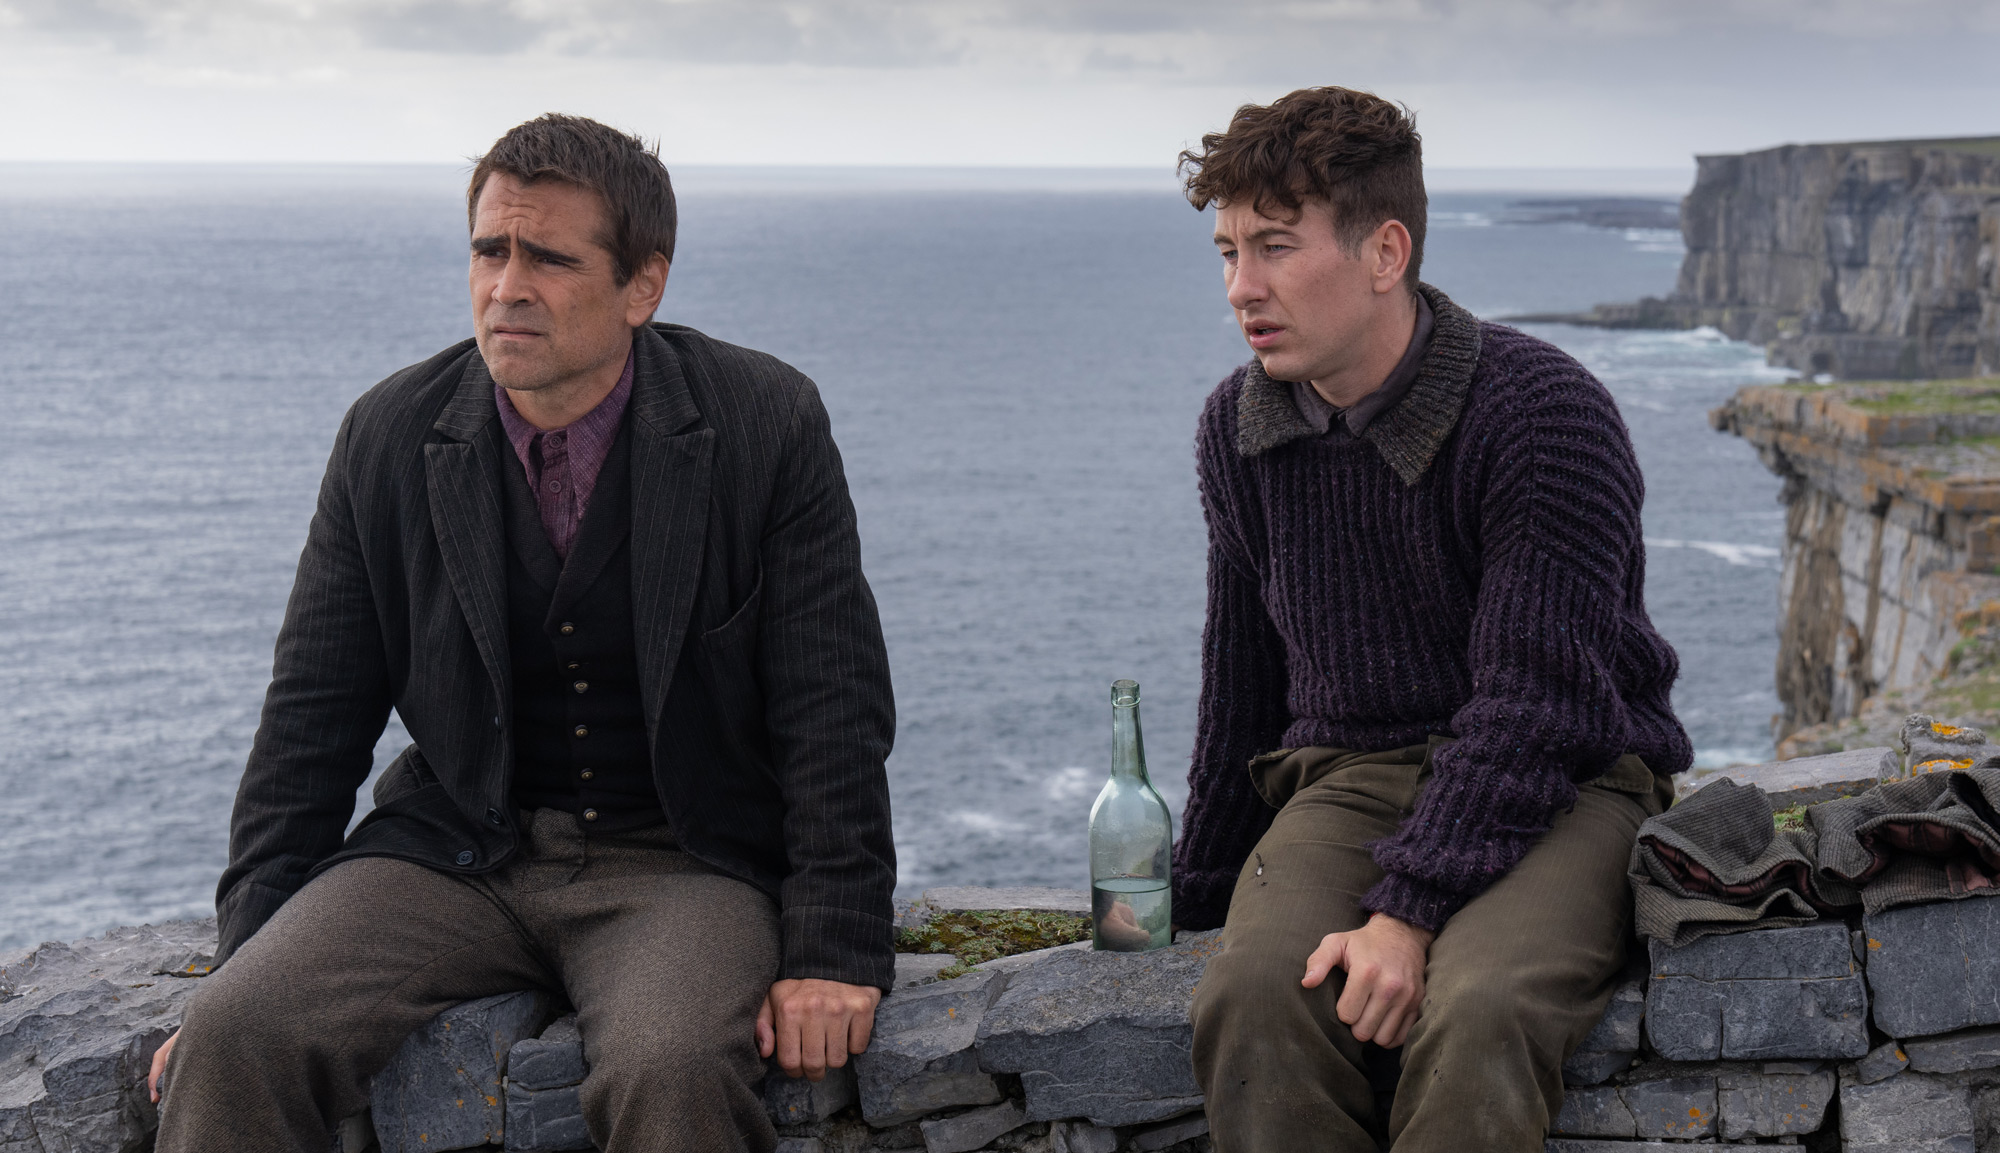 Colin Farrell and Barry Keoghan in "The Banshees of Inisherin"